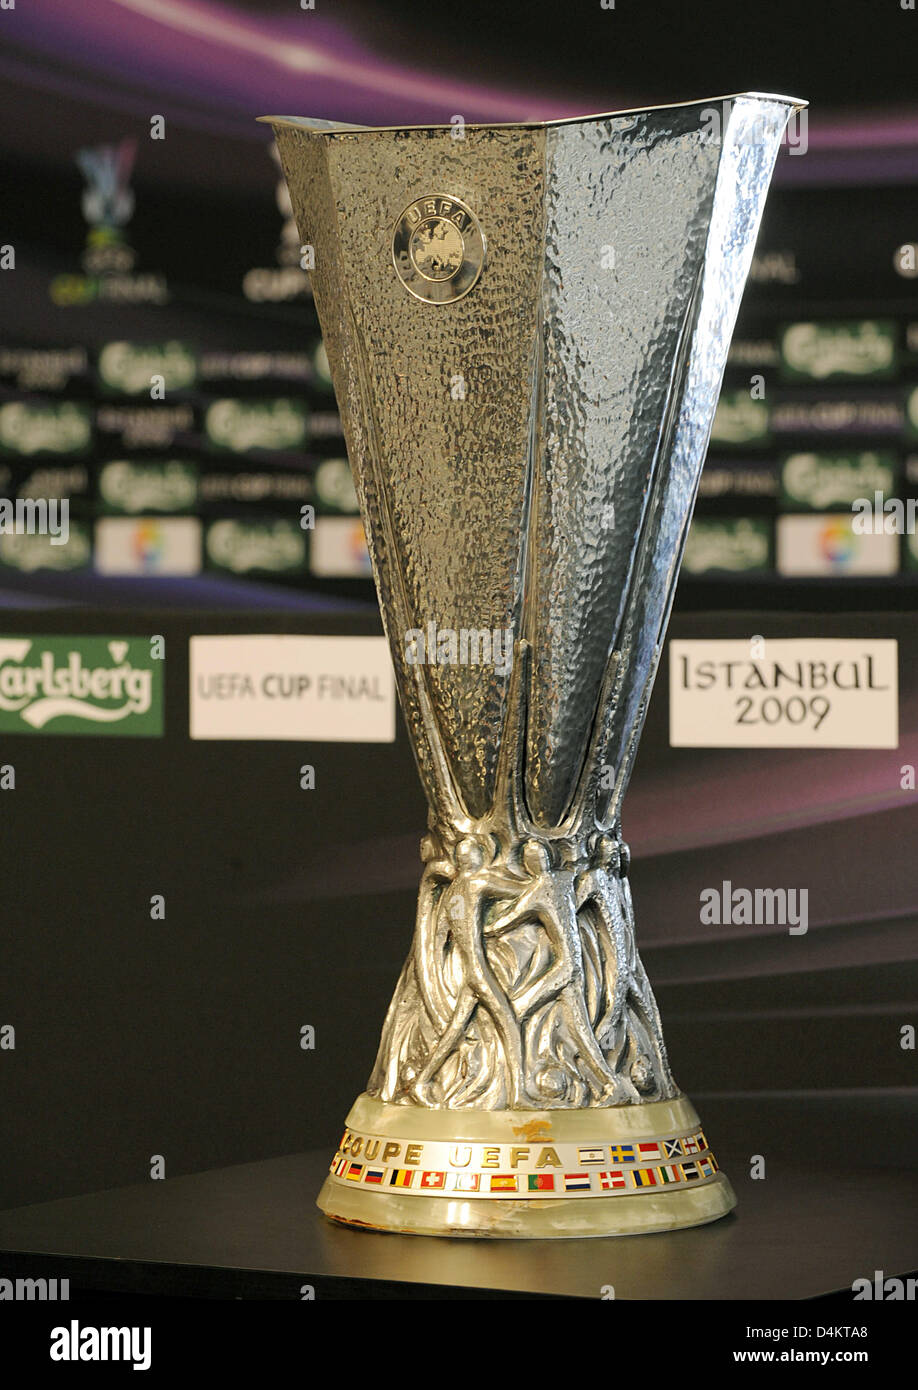 The UEFA Cup stands on a podium prior to the press conference of German Bundesliga club Werder Bremen at Suekrue-Saracoglu stadium in Istanbul, Turkey, 19 May 2009. The final match of the UEFA Cup between Schachtjor Donezk and Werder Bremen will take place there on 20 May 2009. Photo: CARMEN JASPERSEN Stock Photo